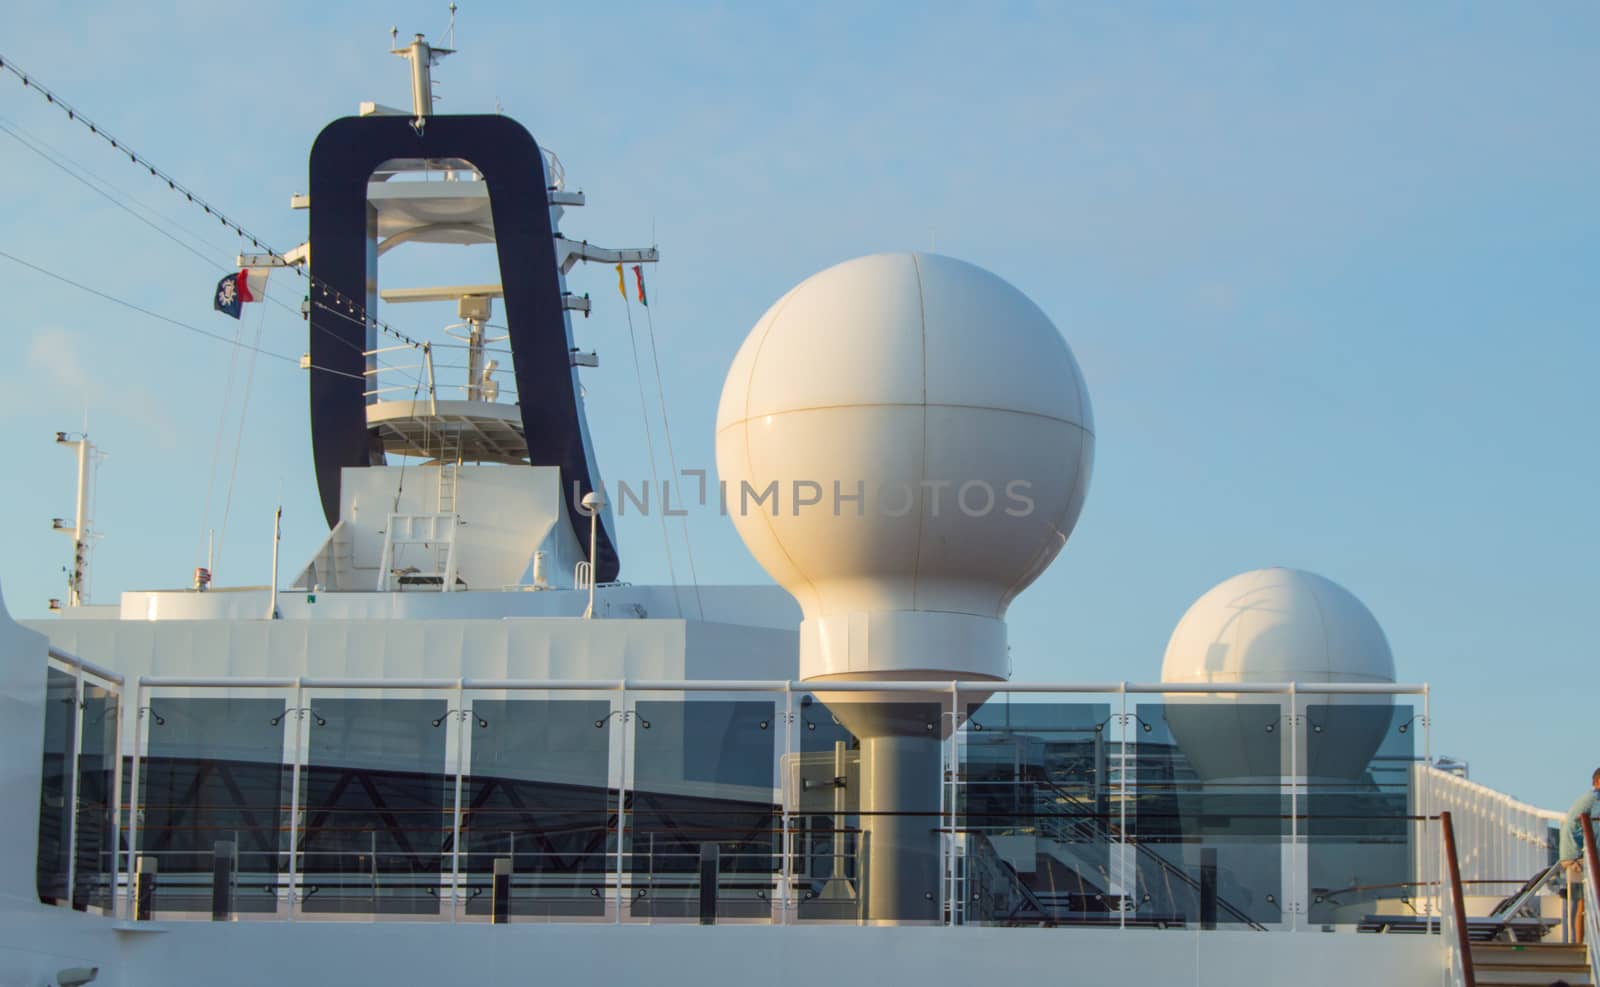 Communication antennas and other electronic equipment on the upper deck of the cruise liner MSC Meraviglia, October 7, 2018 by claire_lucia